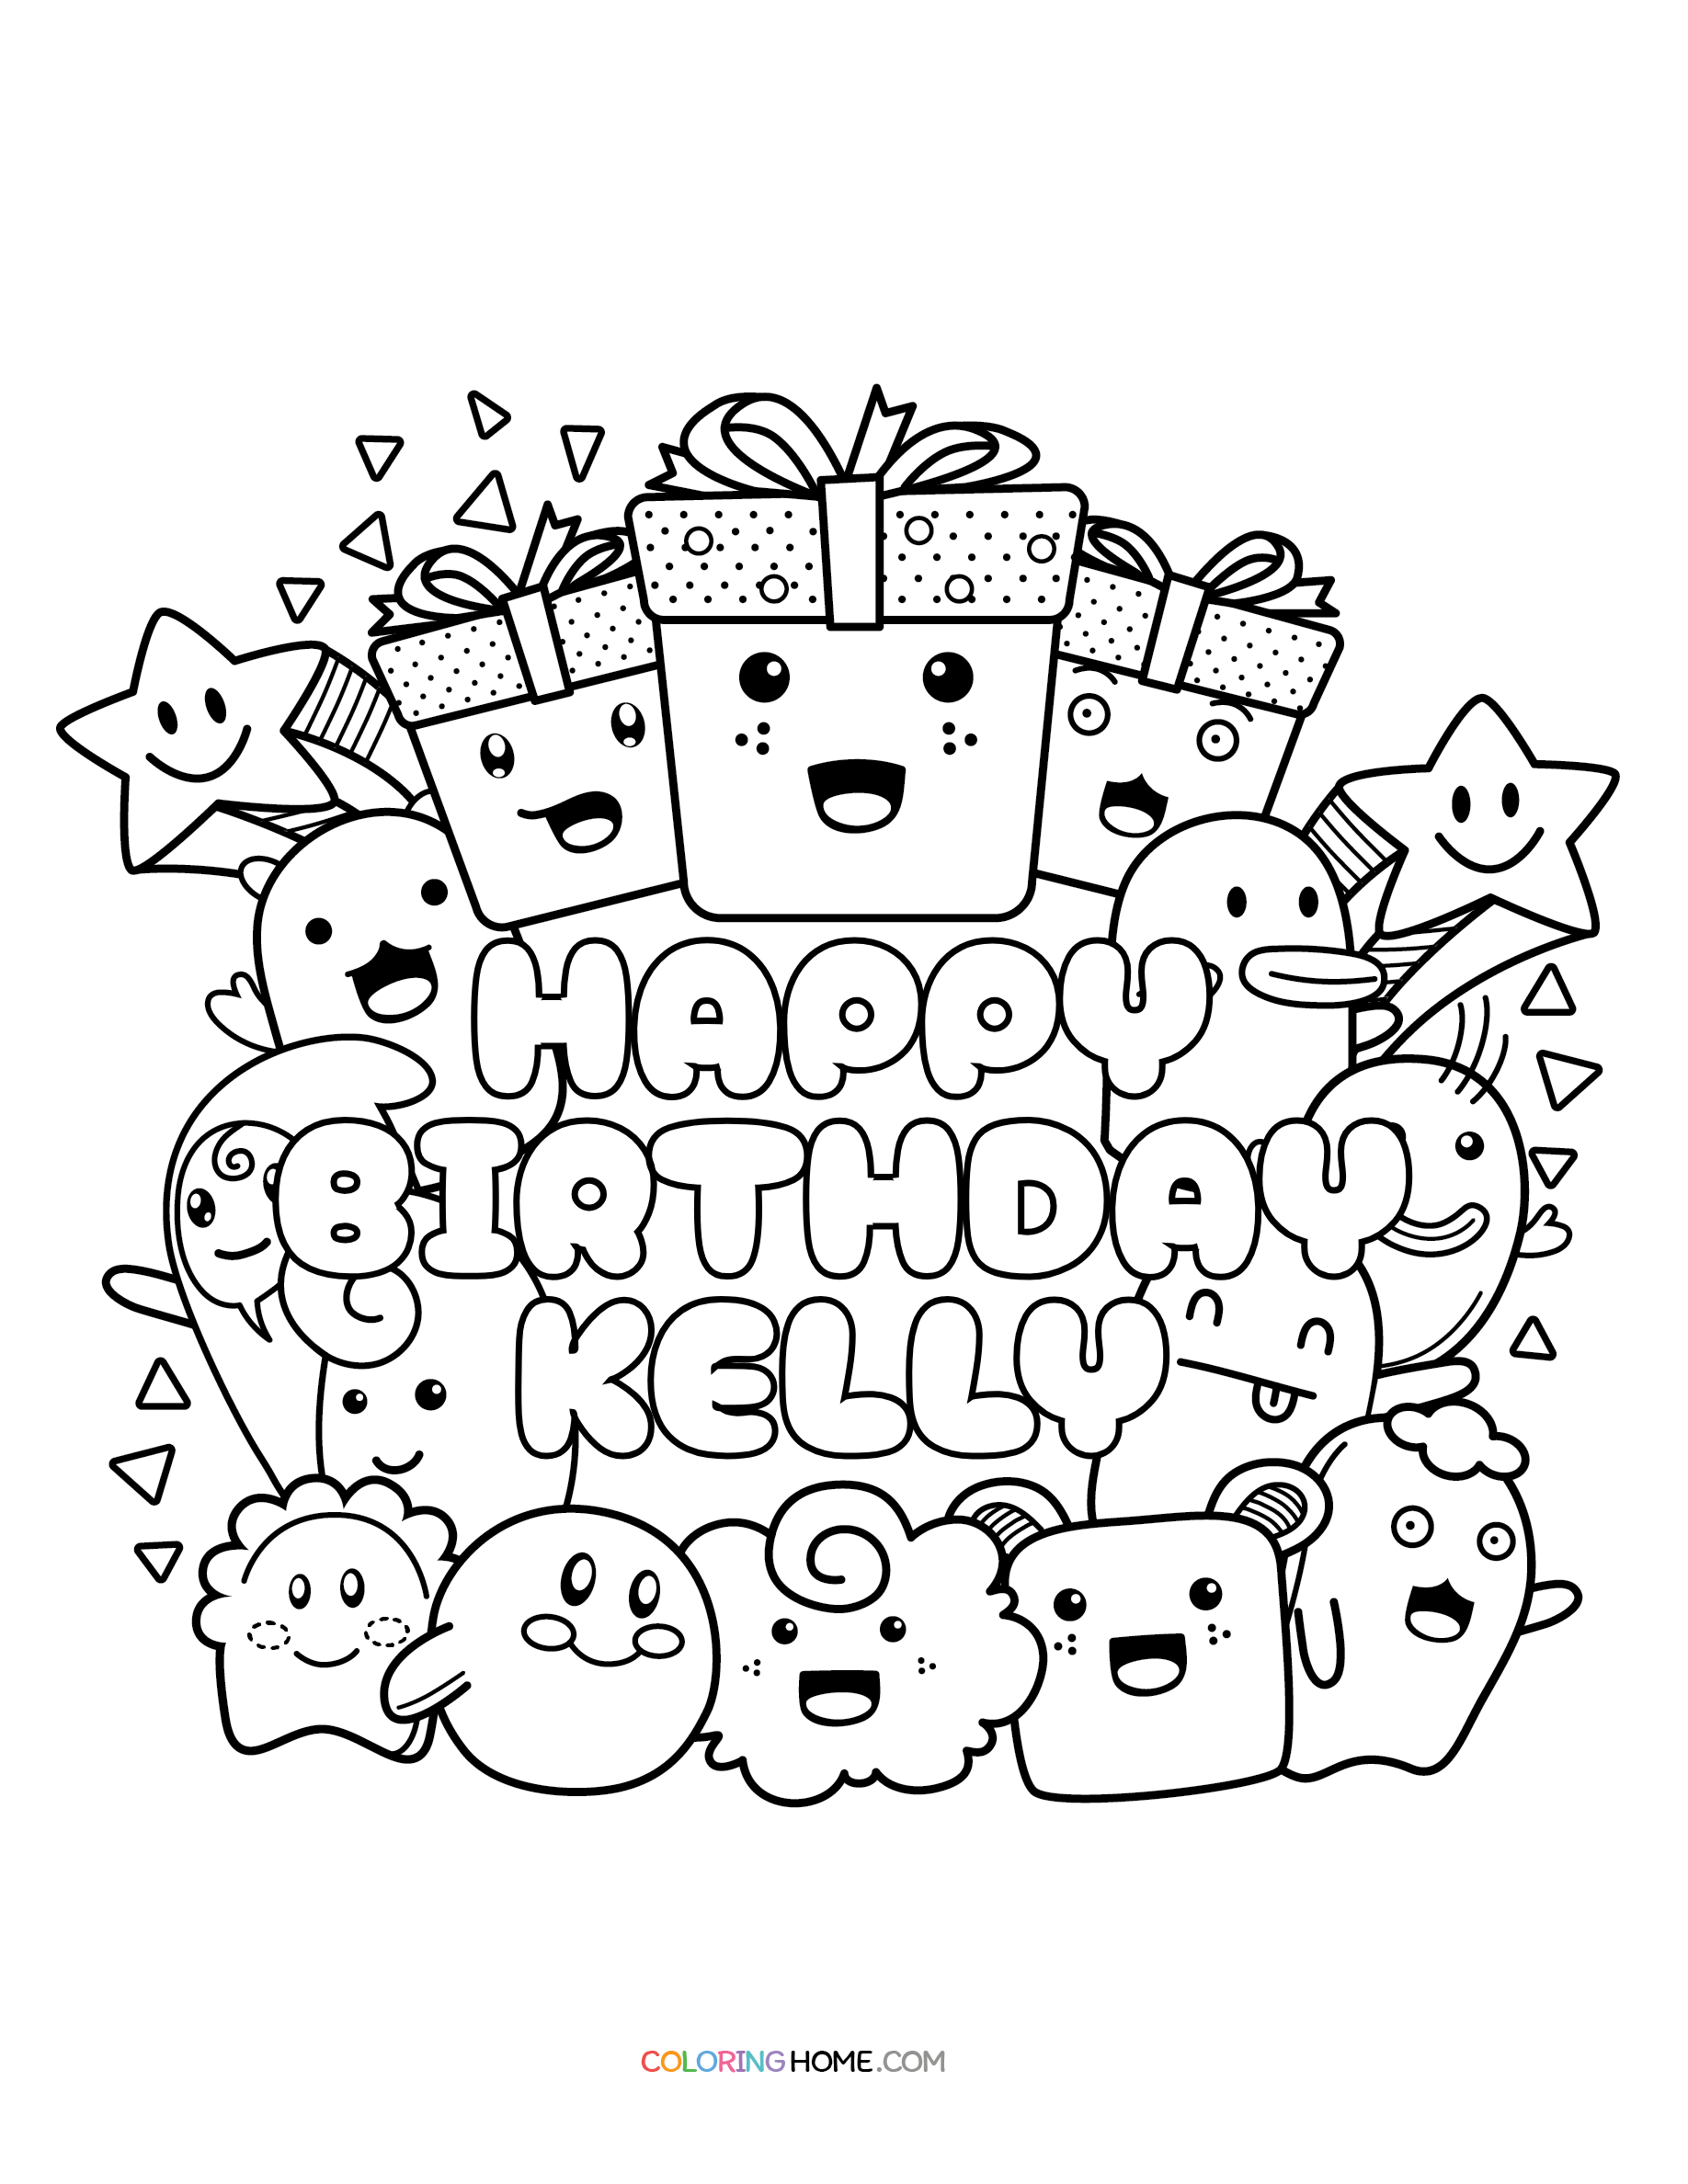 Happy Birthday Kelly coloring page